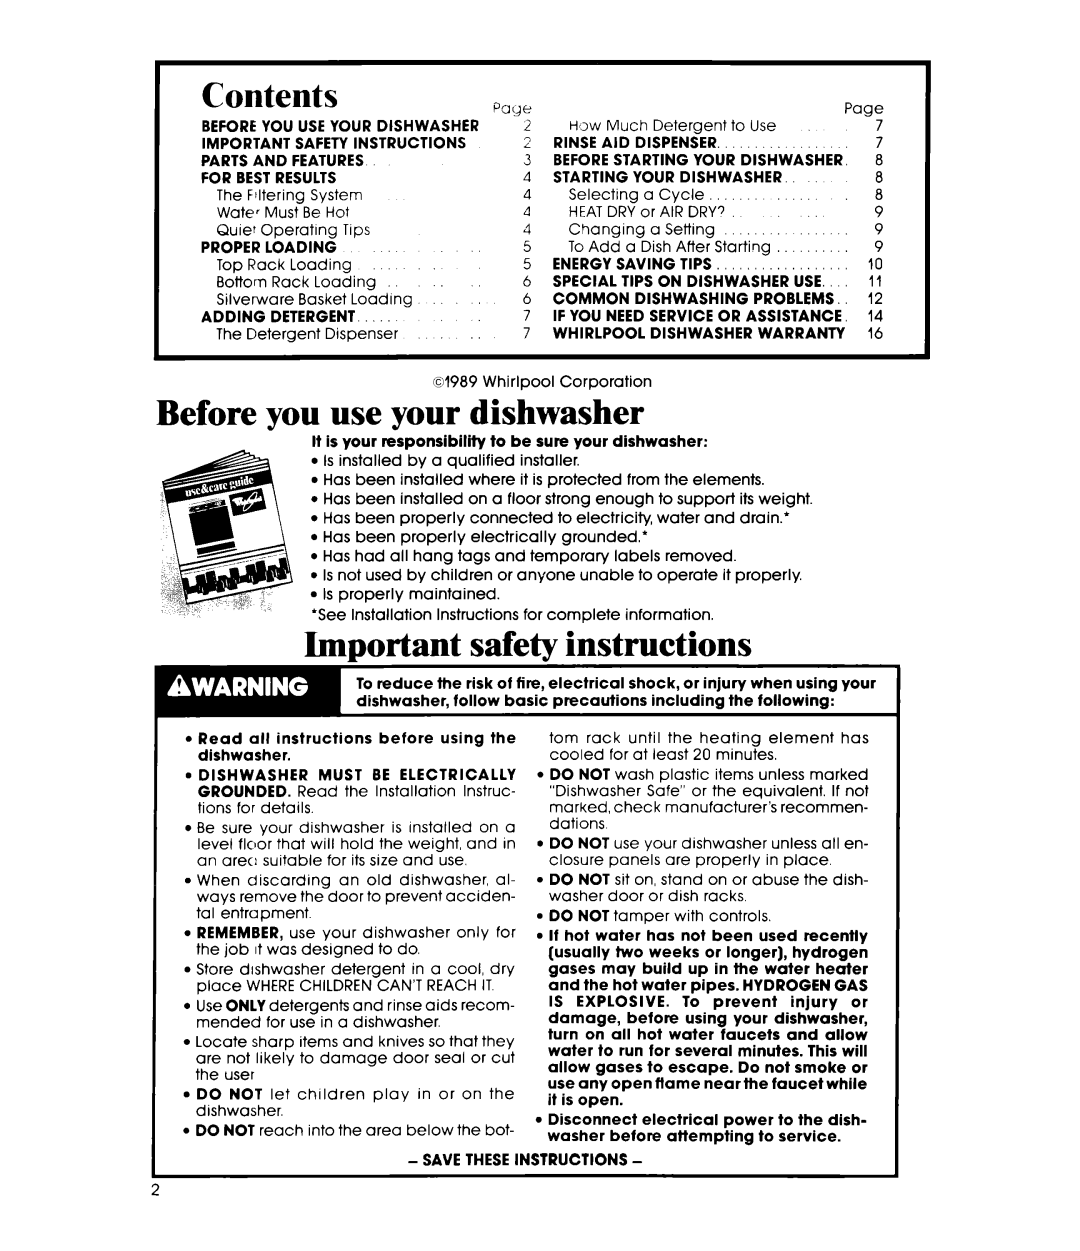 Whirlpool DU8350XT manual Contents, Qlye, Before you use your dishwasher, safety instructions 